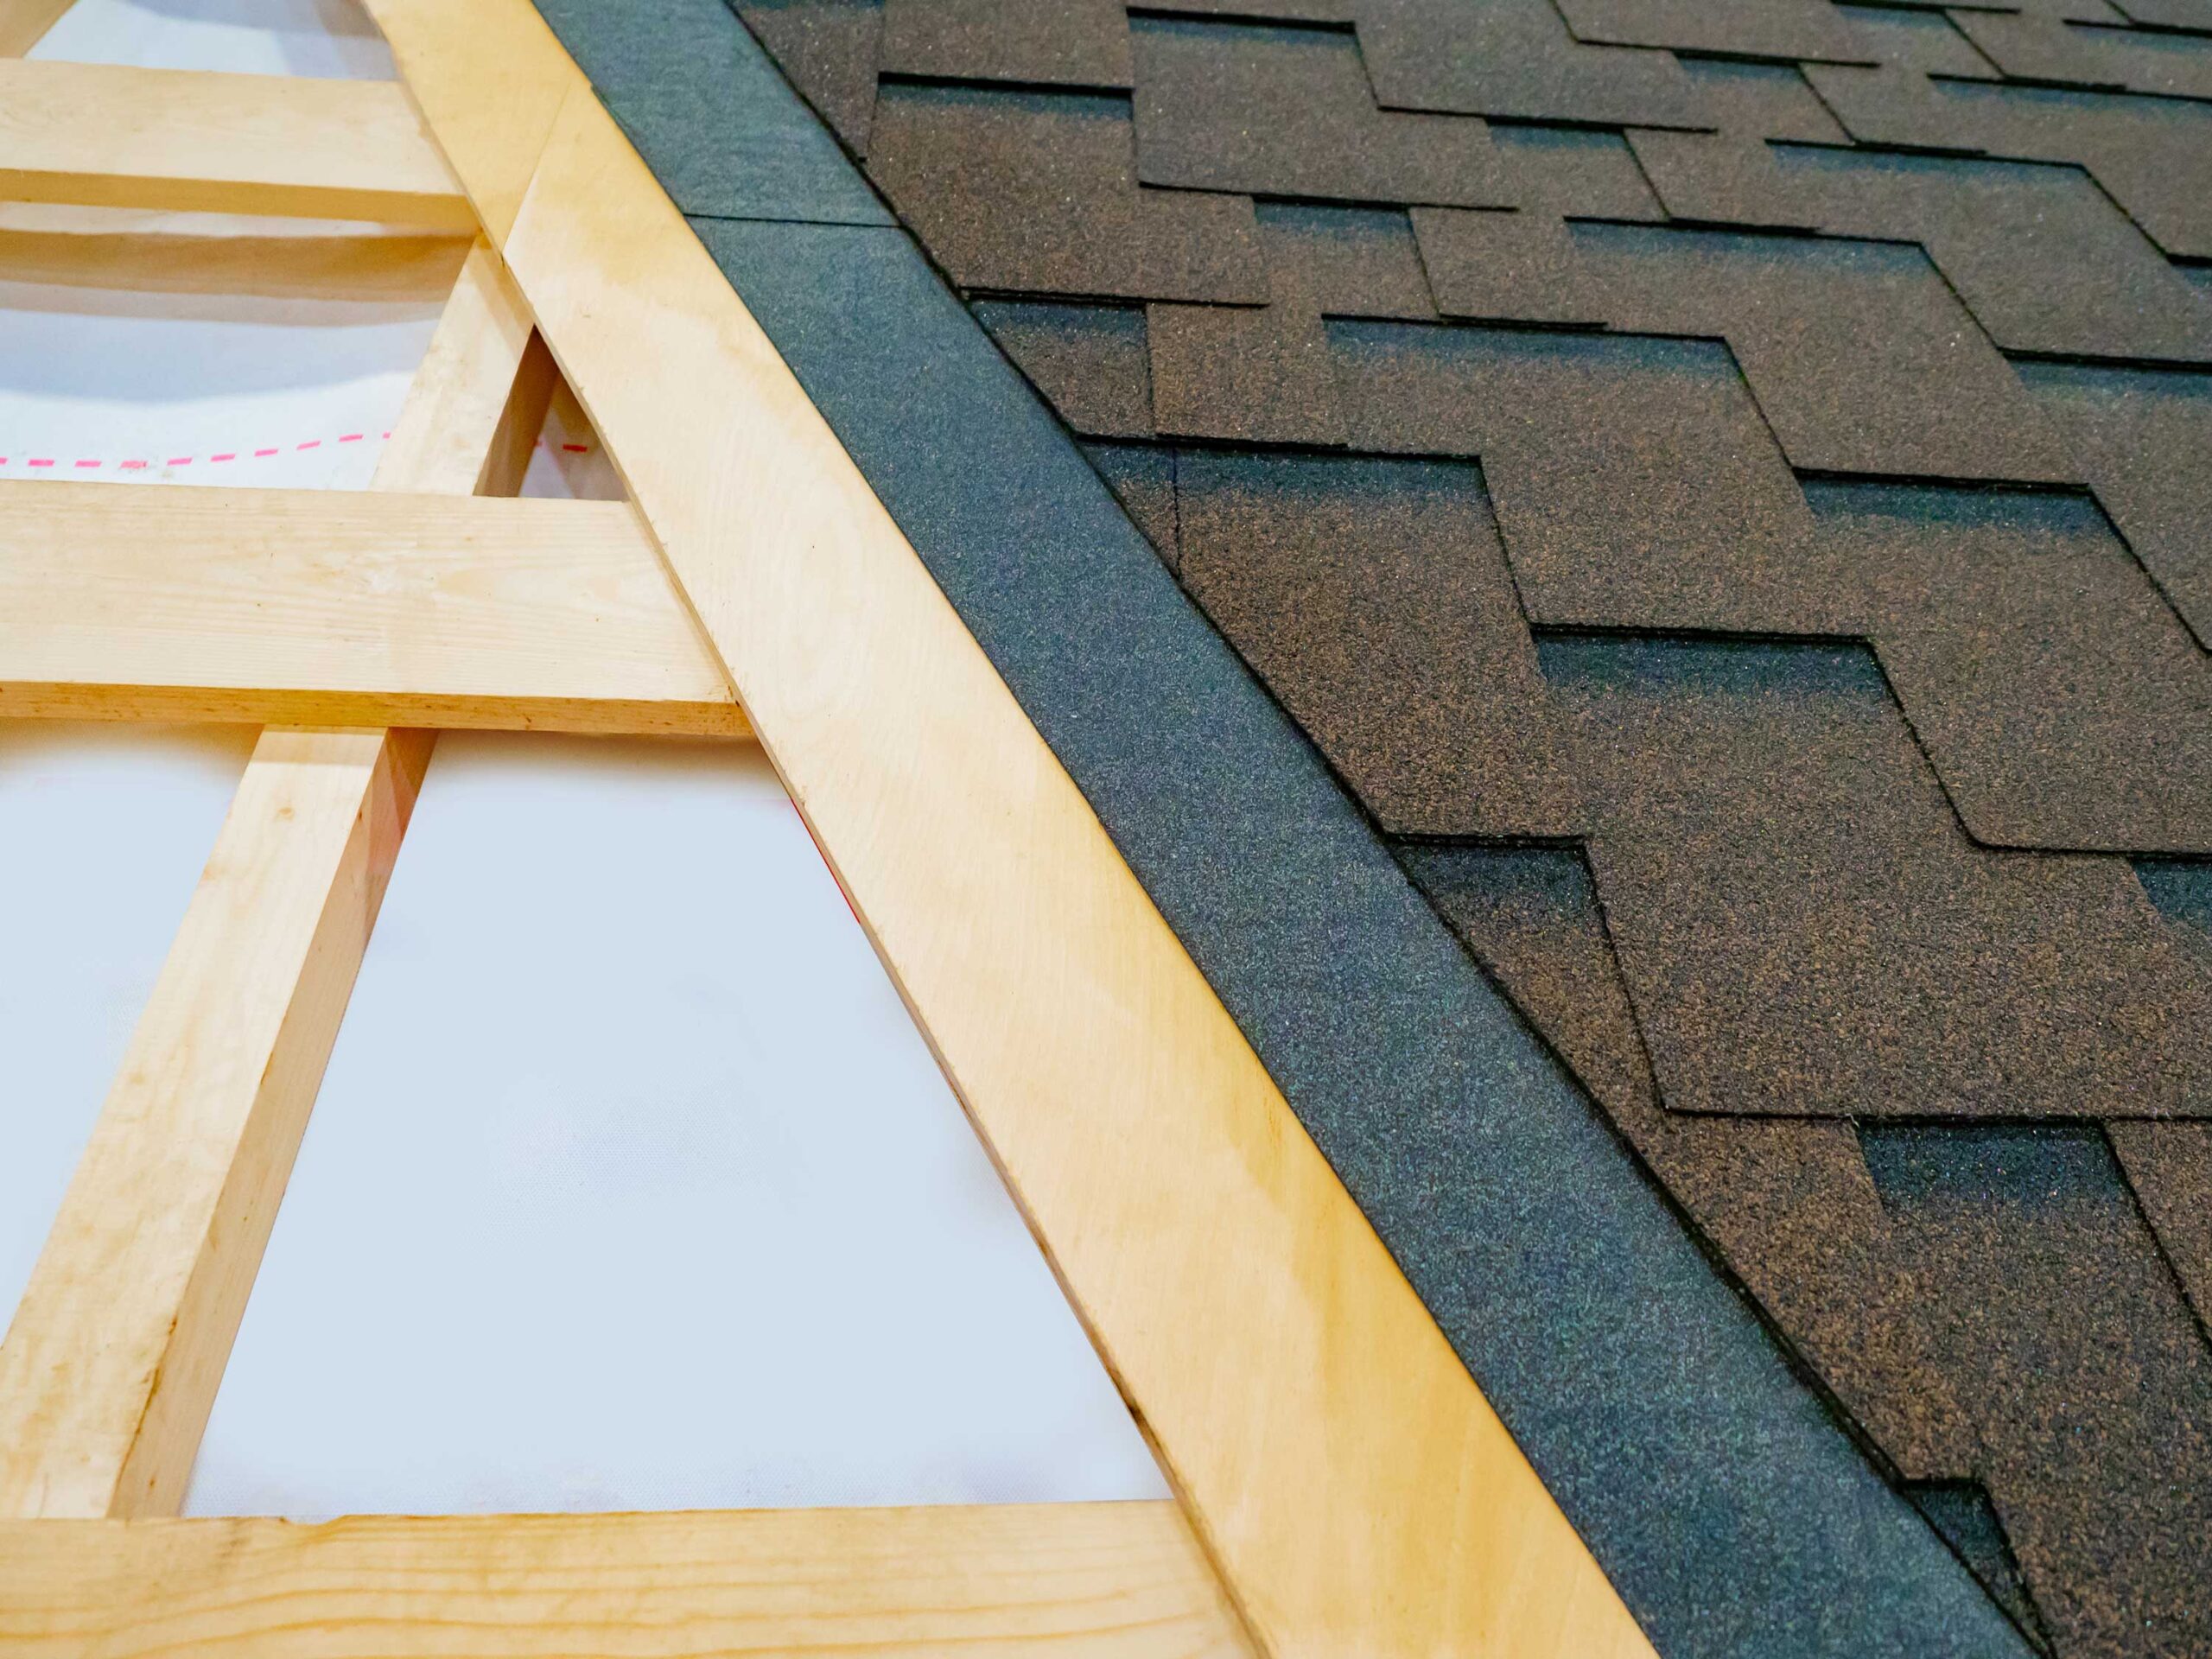 local roofing contractor, local roofing company, Houston